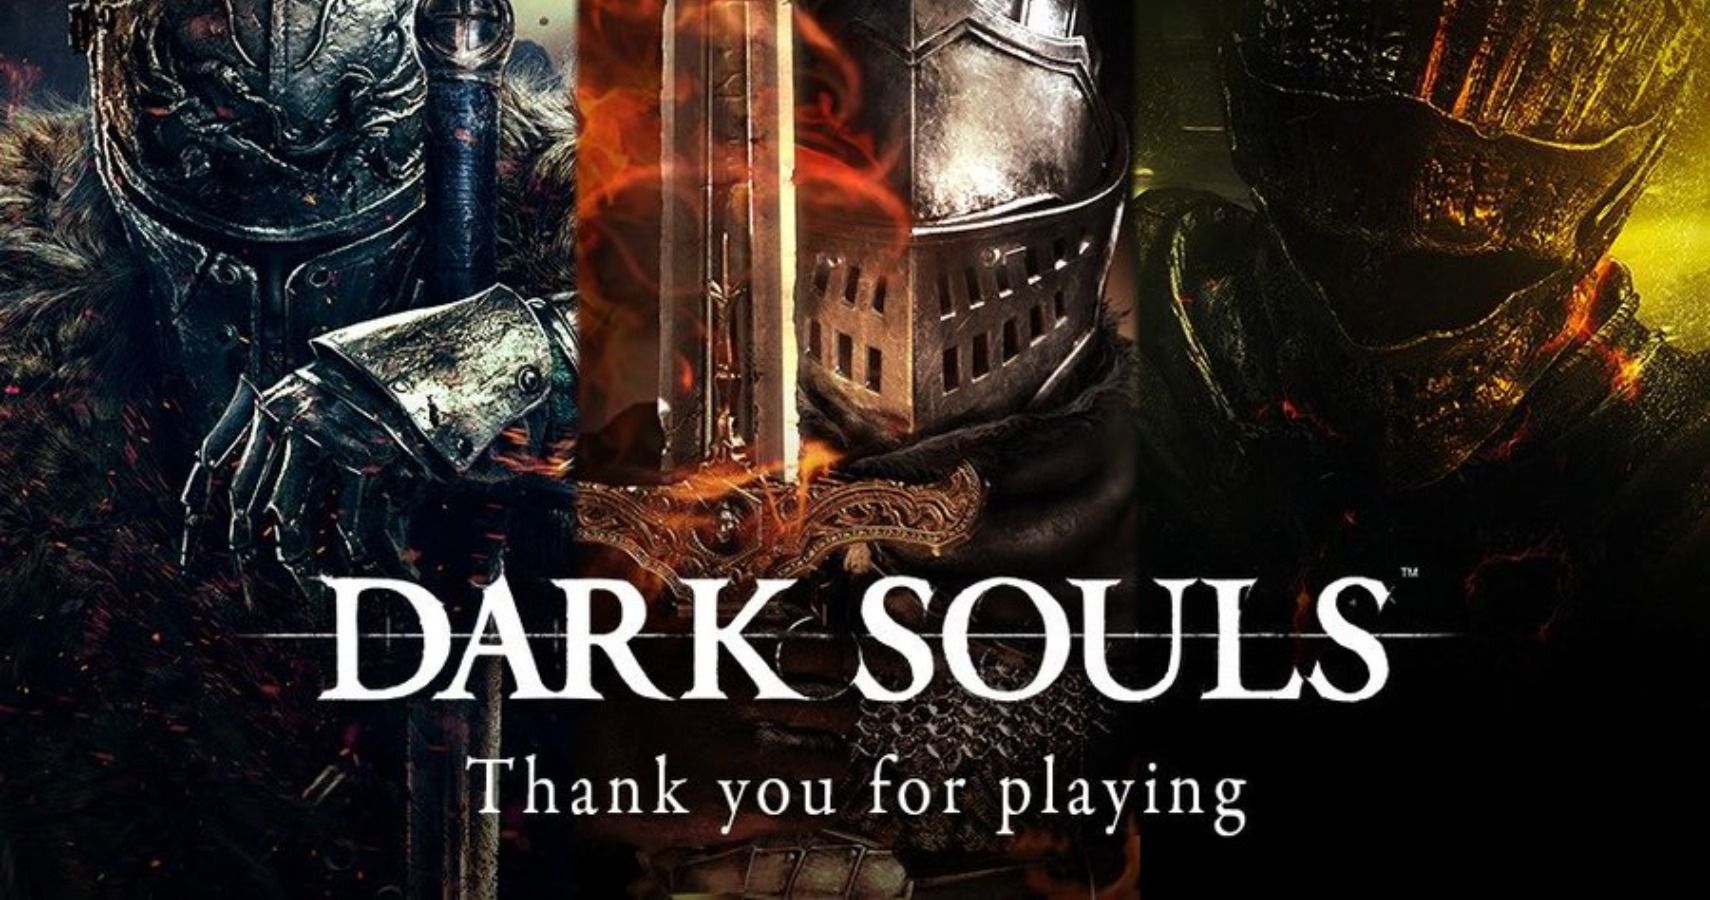 The Dark Souls Series Has Sold Over 27 Million Copies To Date